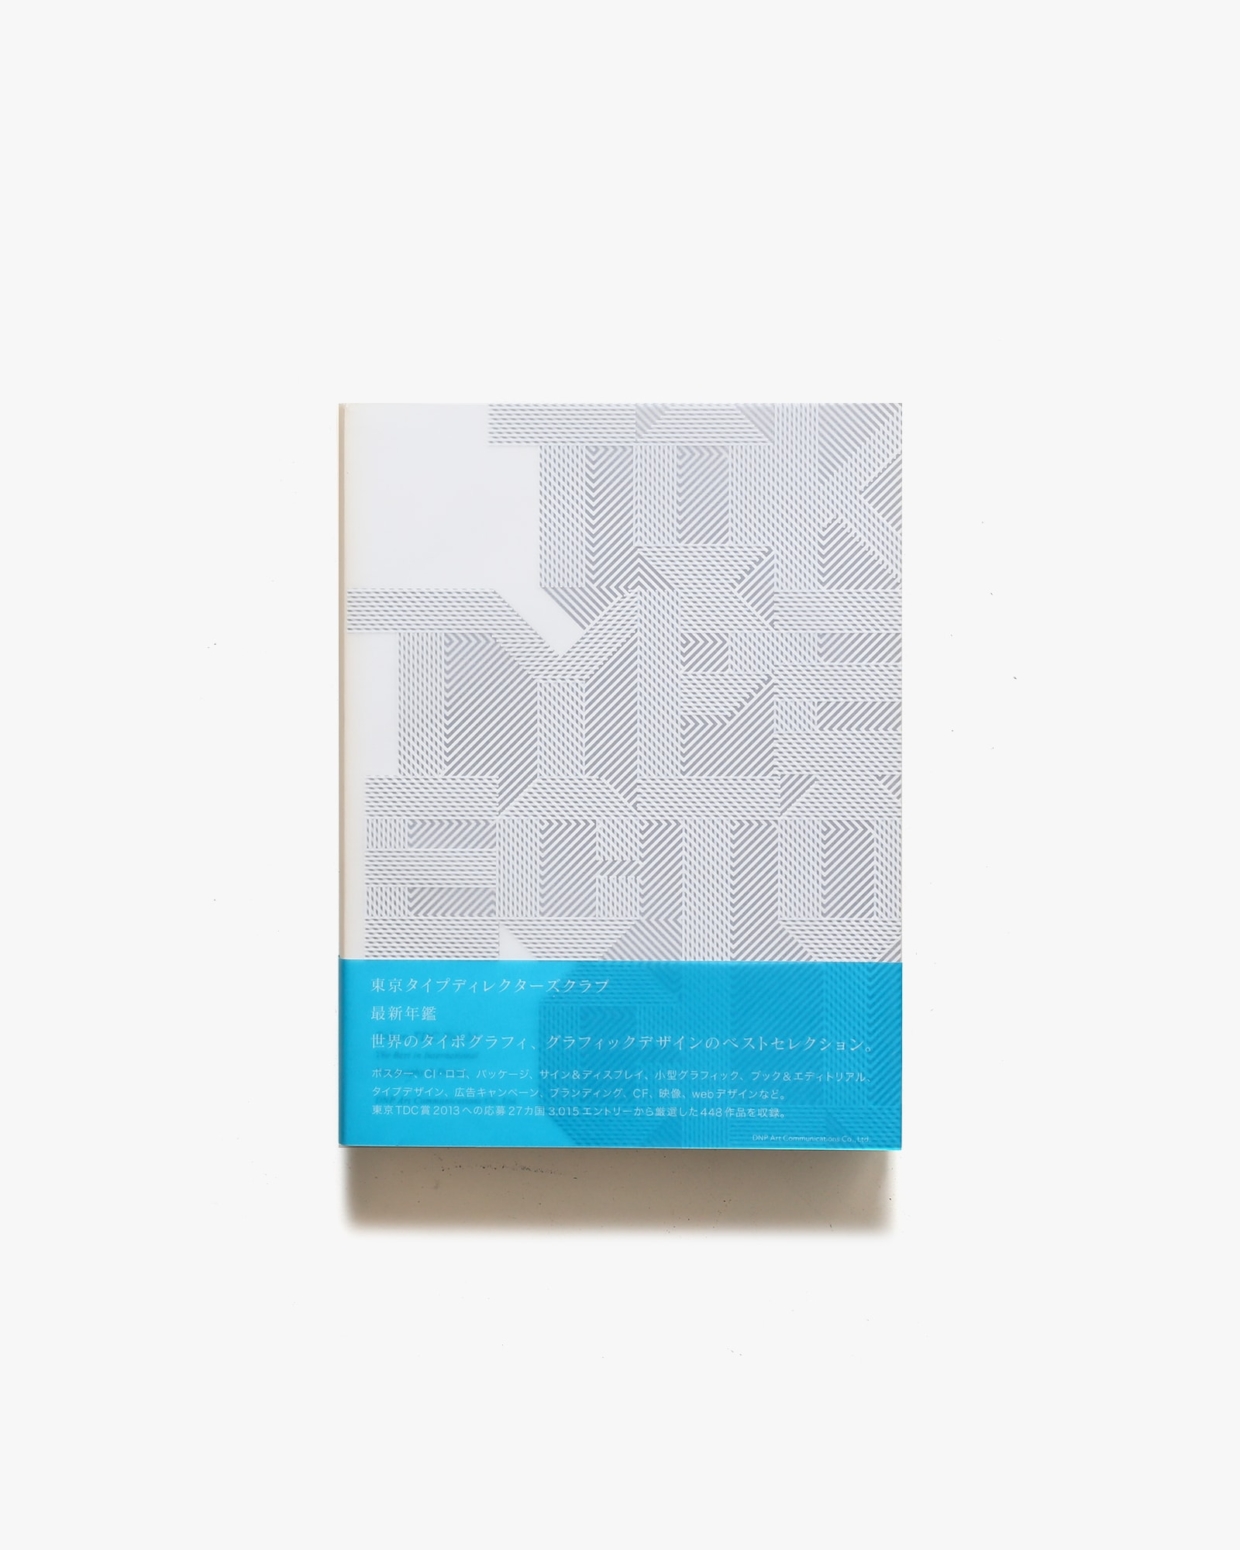 Tokyo TDC vol.24 The Best in International Typography ＆ Design | 東京タイプディレクターズクラブ